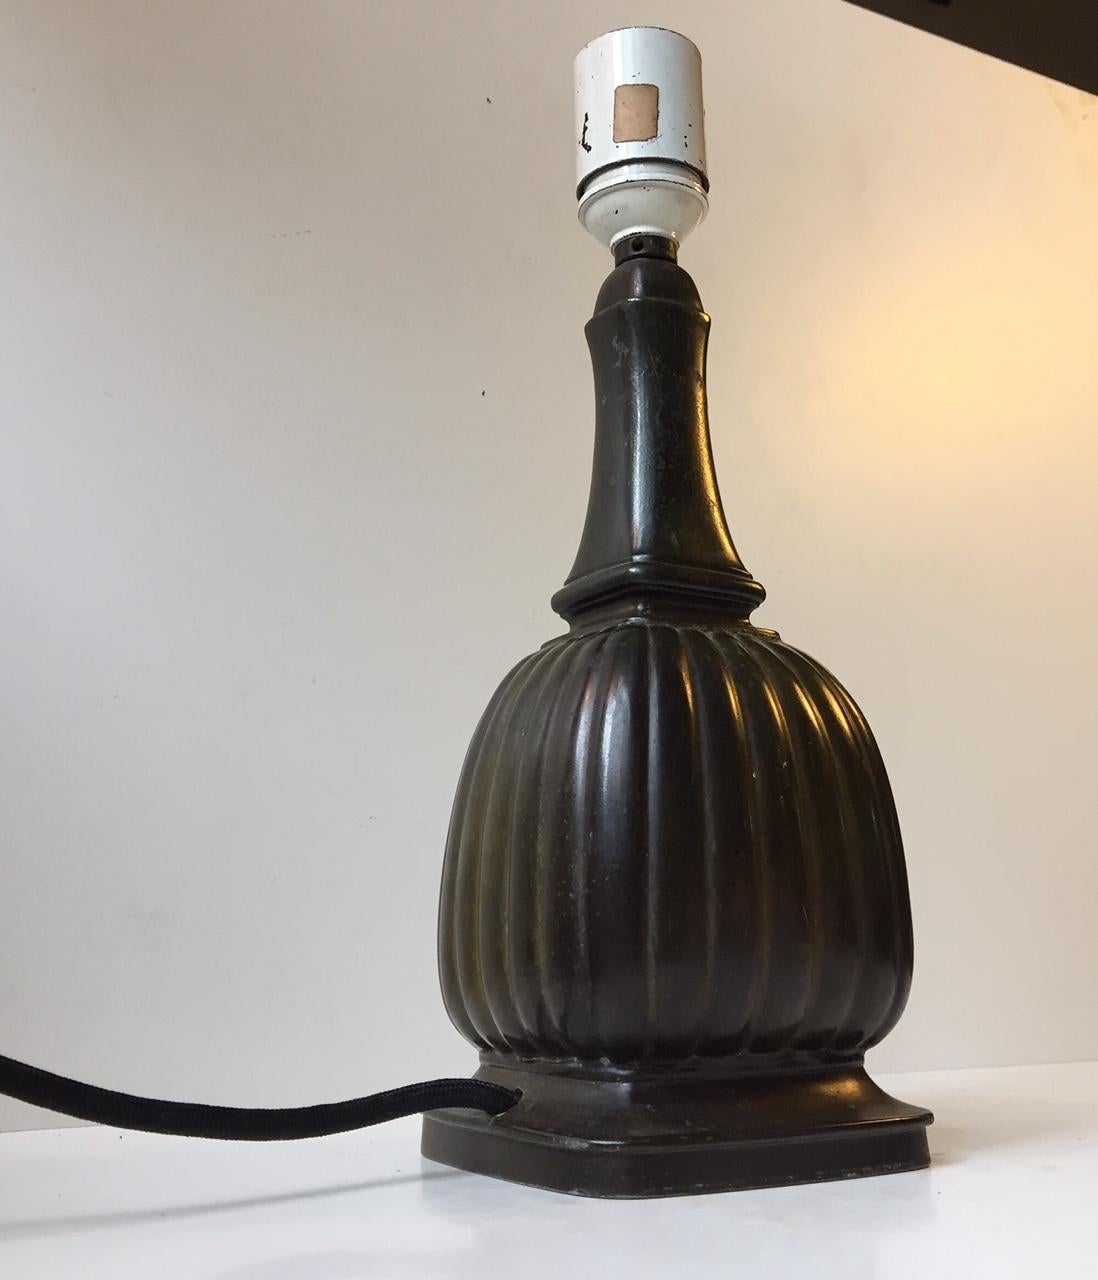 This baluster-shaped table lamp with a partially fluted corpus dates to the 1930s and was made in Denmark. The lamp is made from diskometal, which is an alloy invented by Just Andersen and mimics the green/dark patination of bronze. The base is